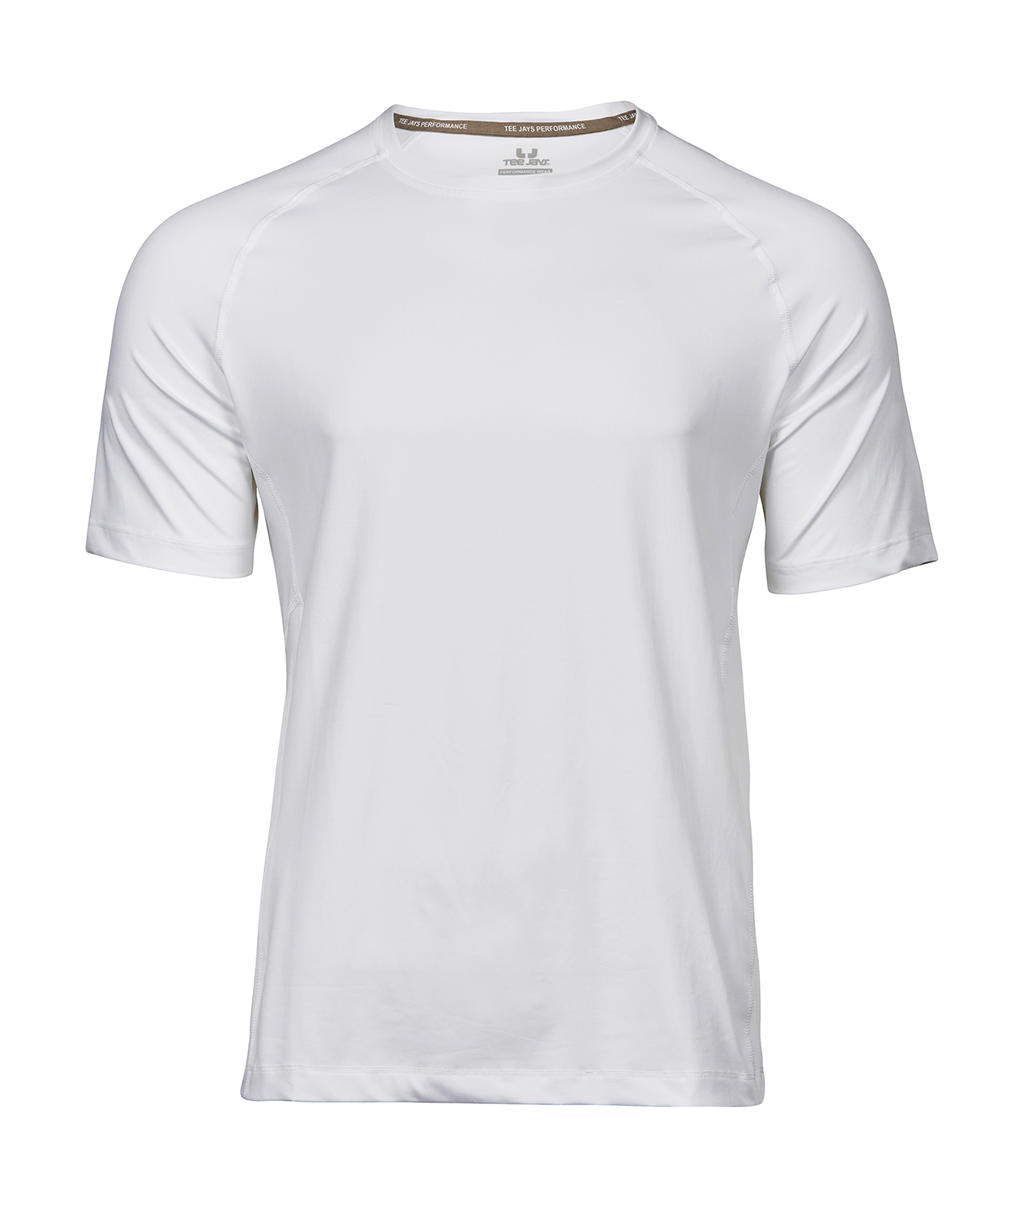  COOLdry Tee in Farbe White